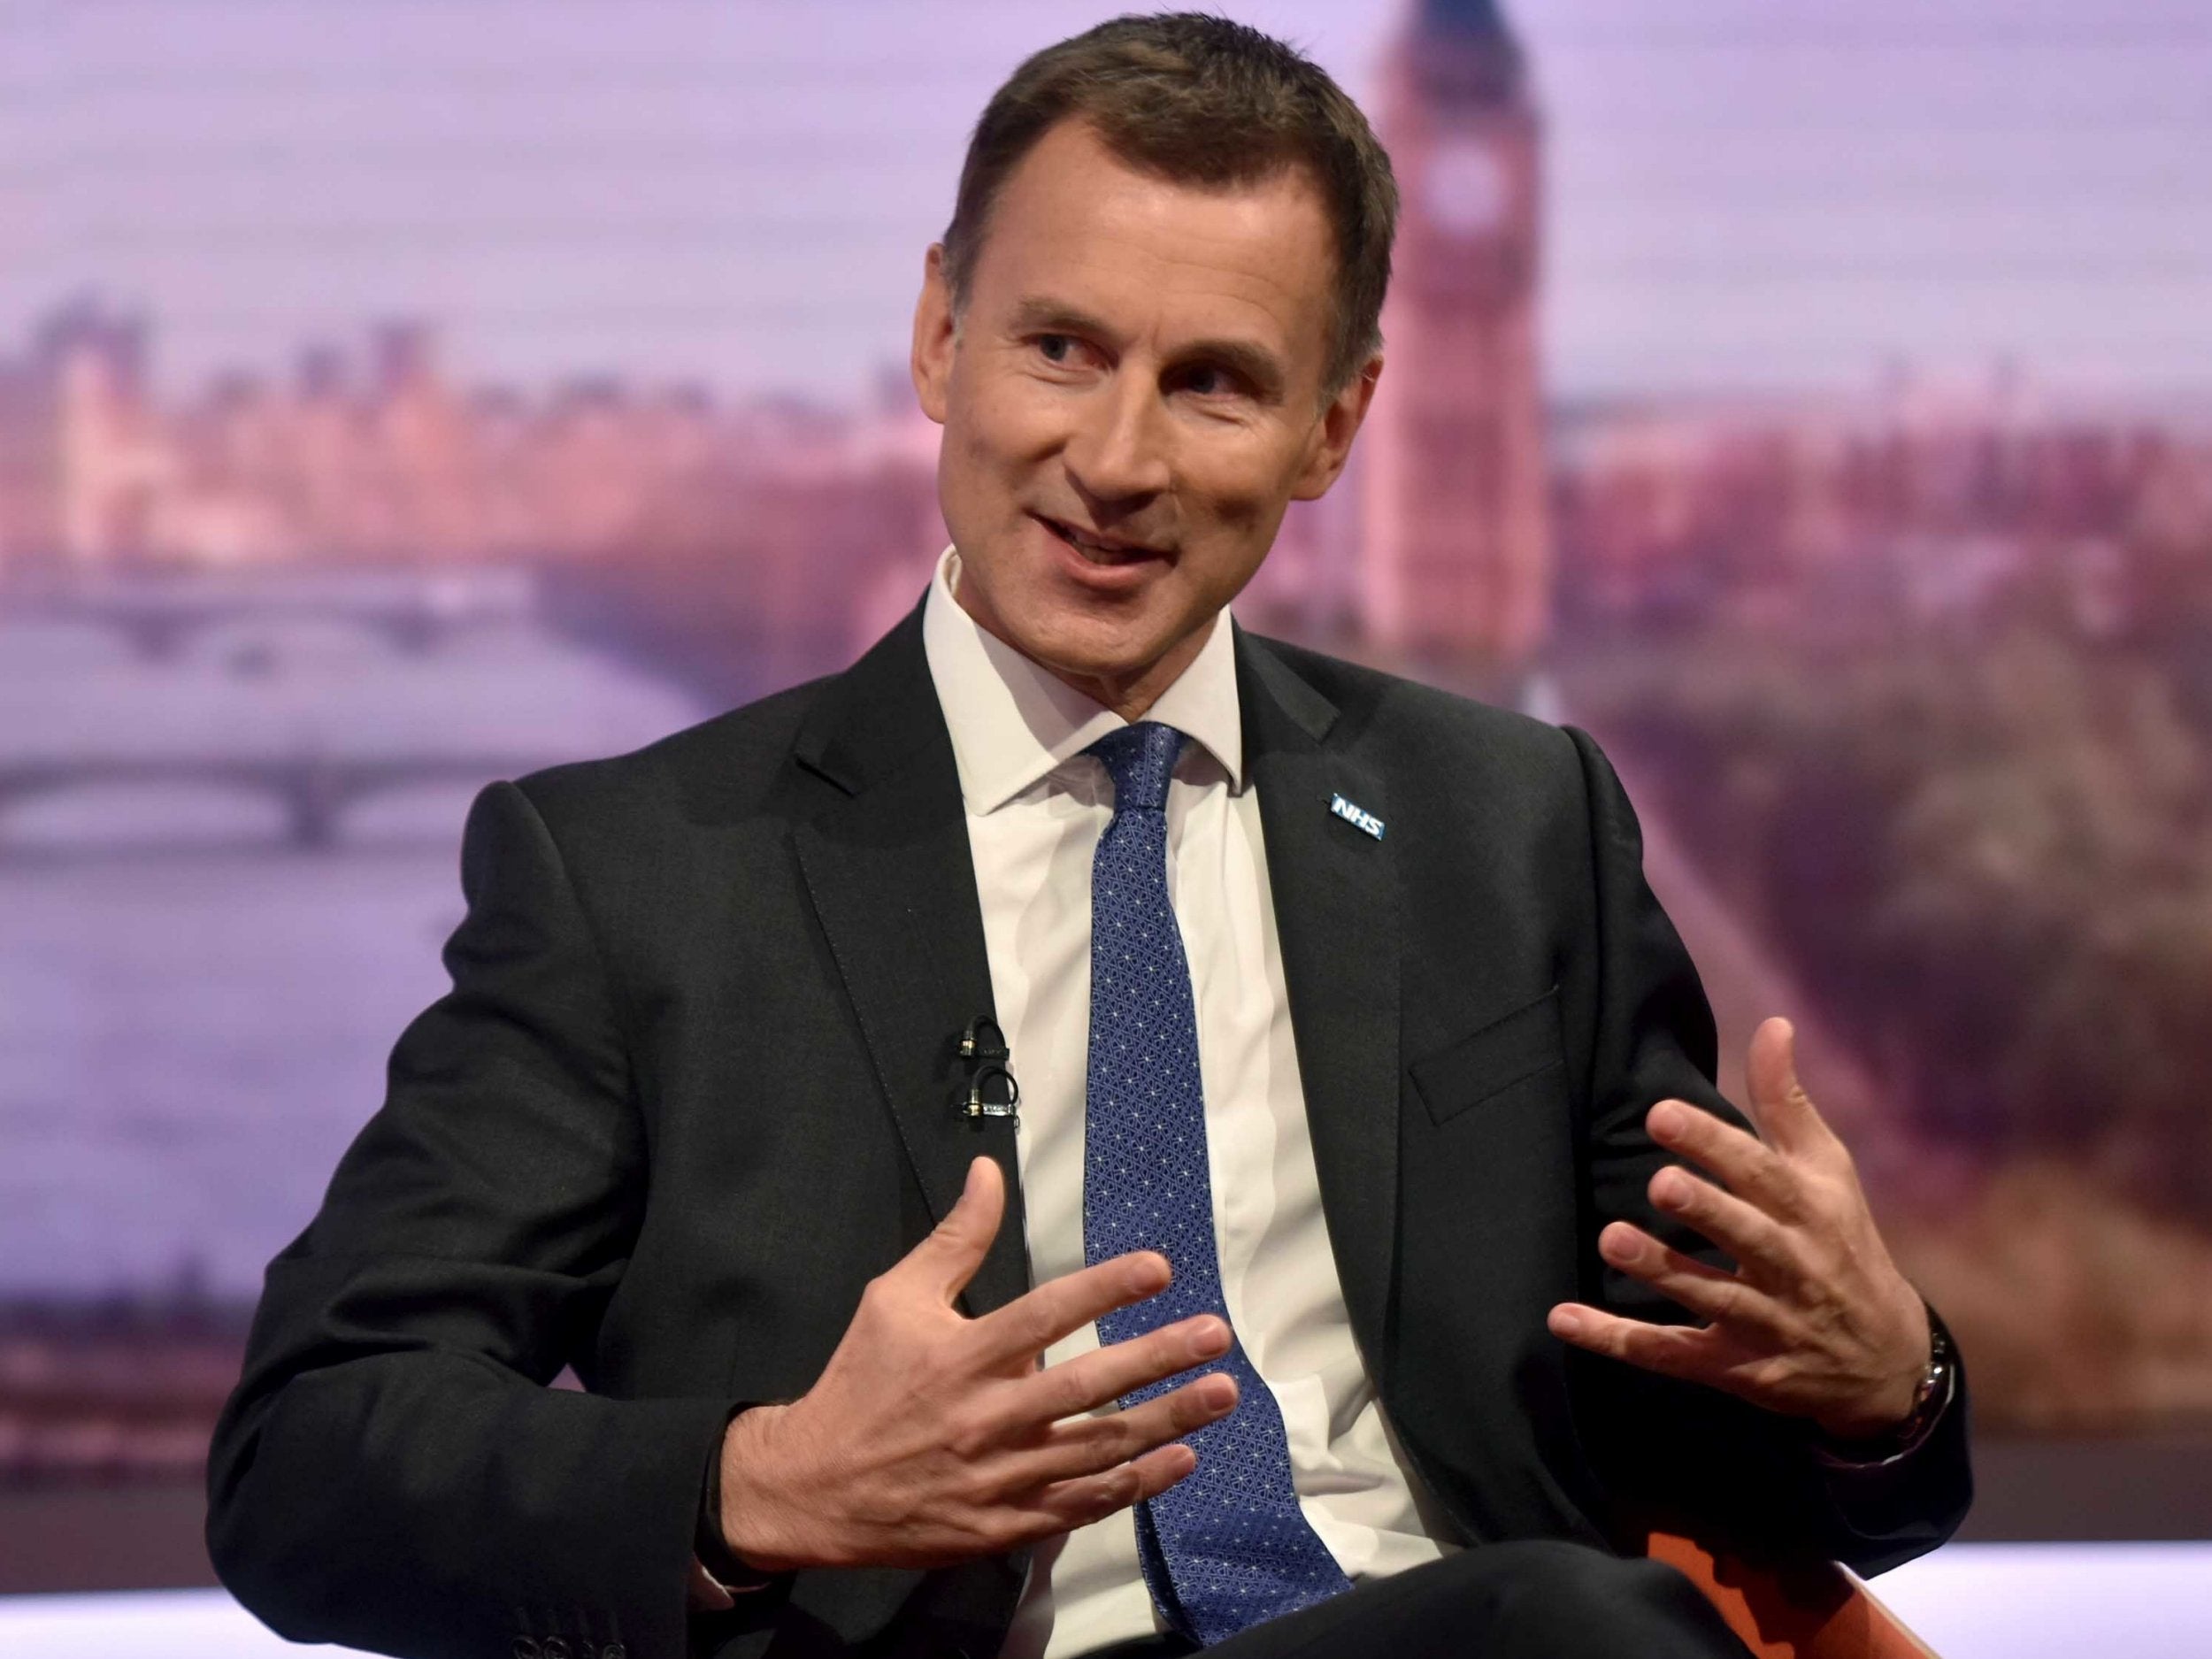 Businesses should stop warning about negative impact of Brexit, says Jeremy Hunt